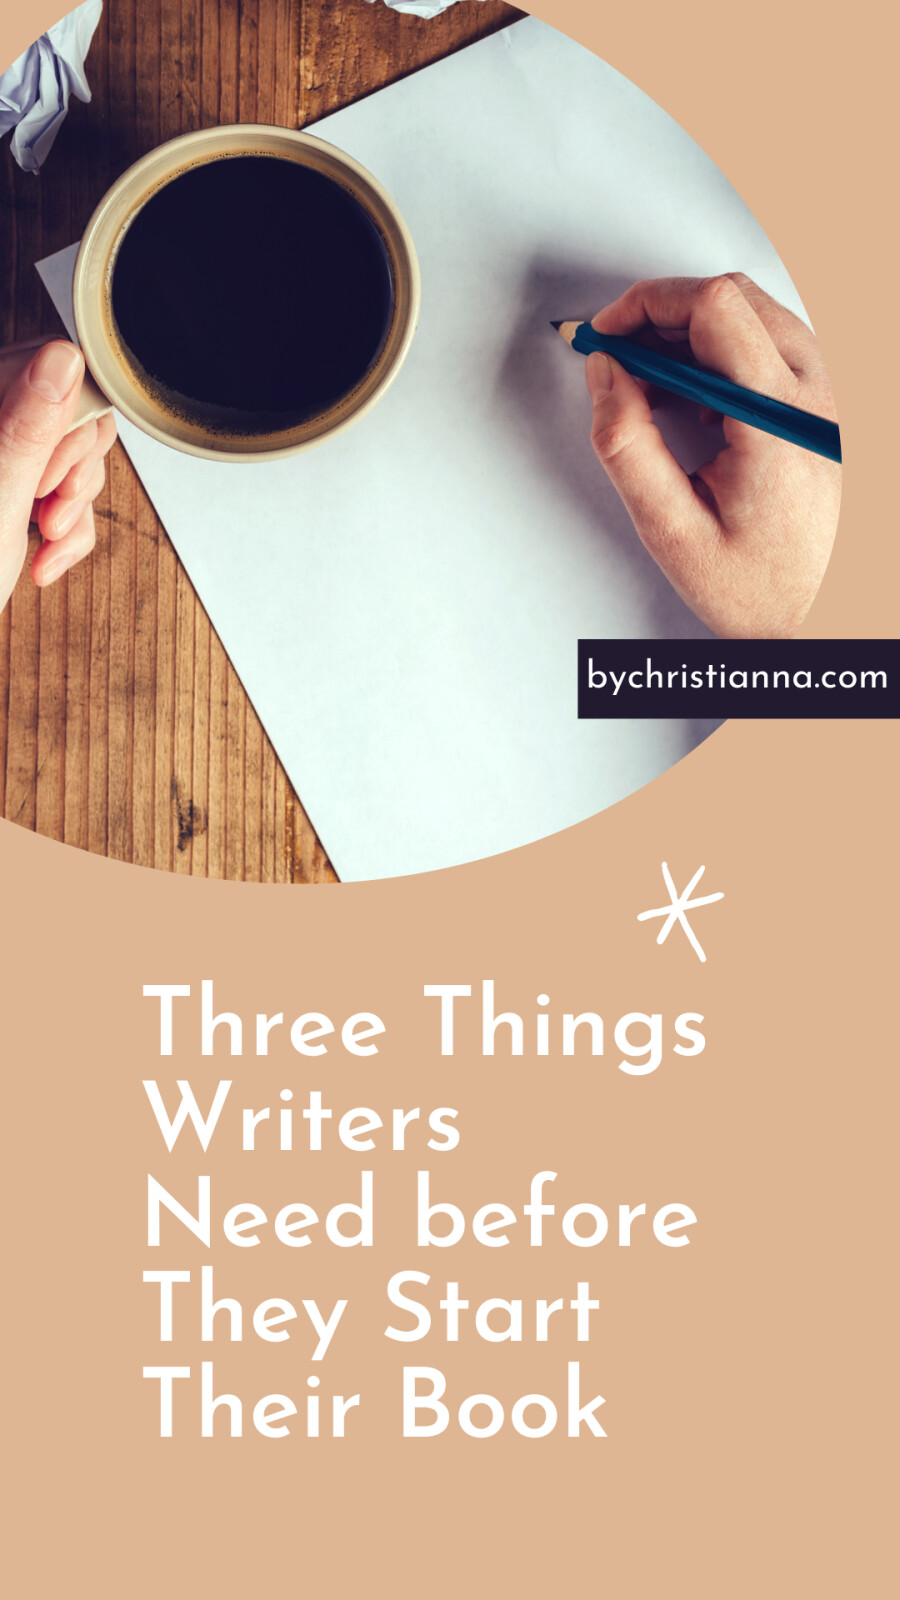 Three Things Writers Need before They Start Their Book